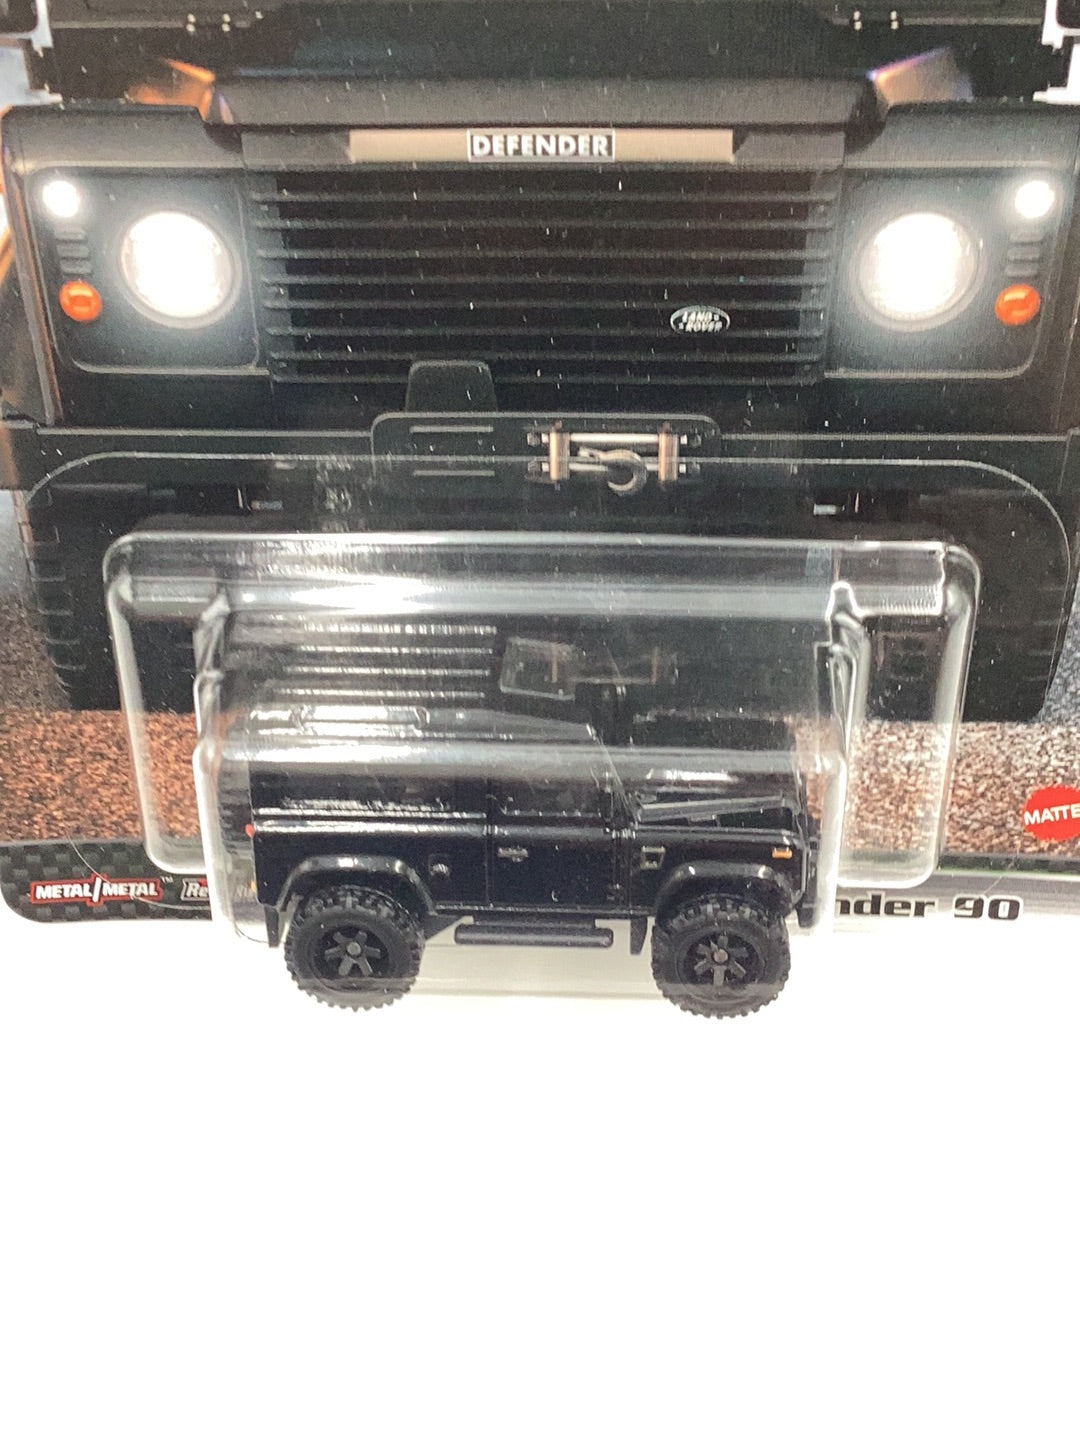 Hot wheels fast and furious furious fleet Land Rover Defender 90 5/5 249I